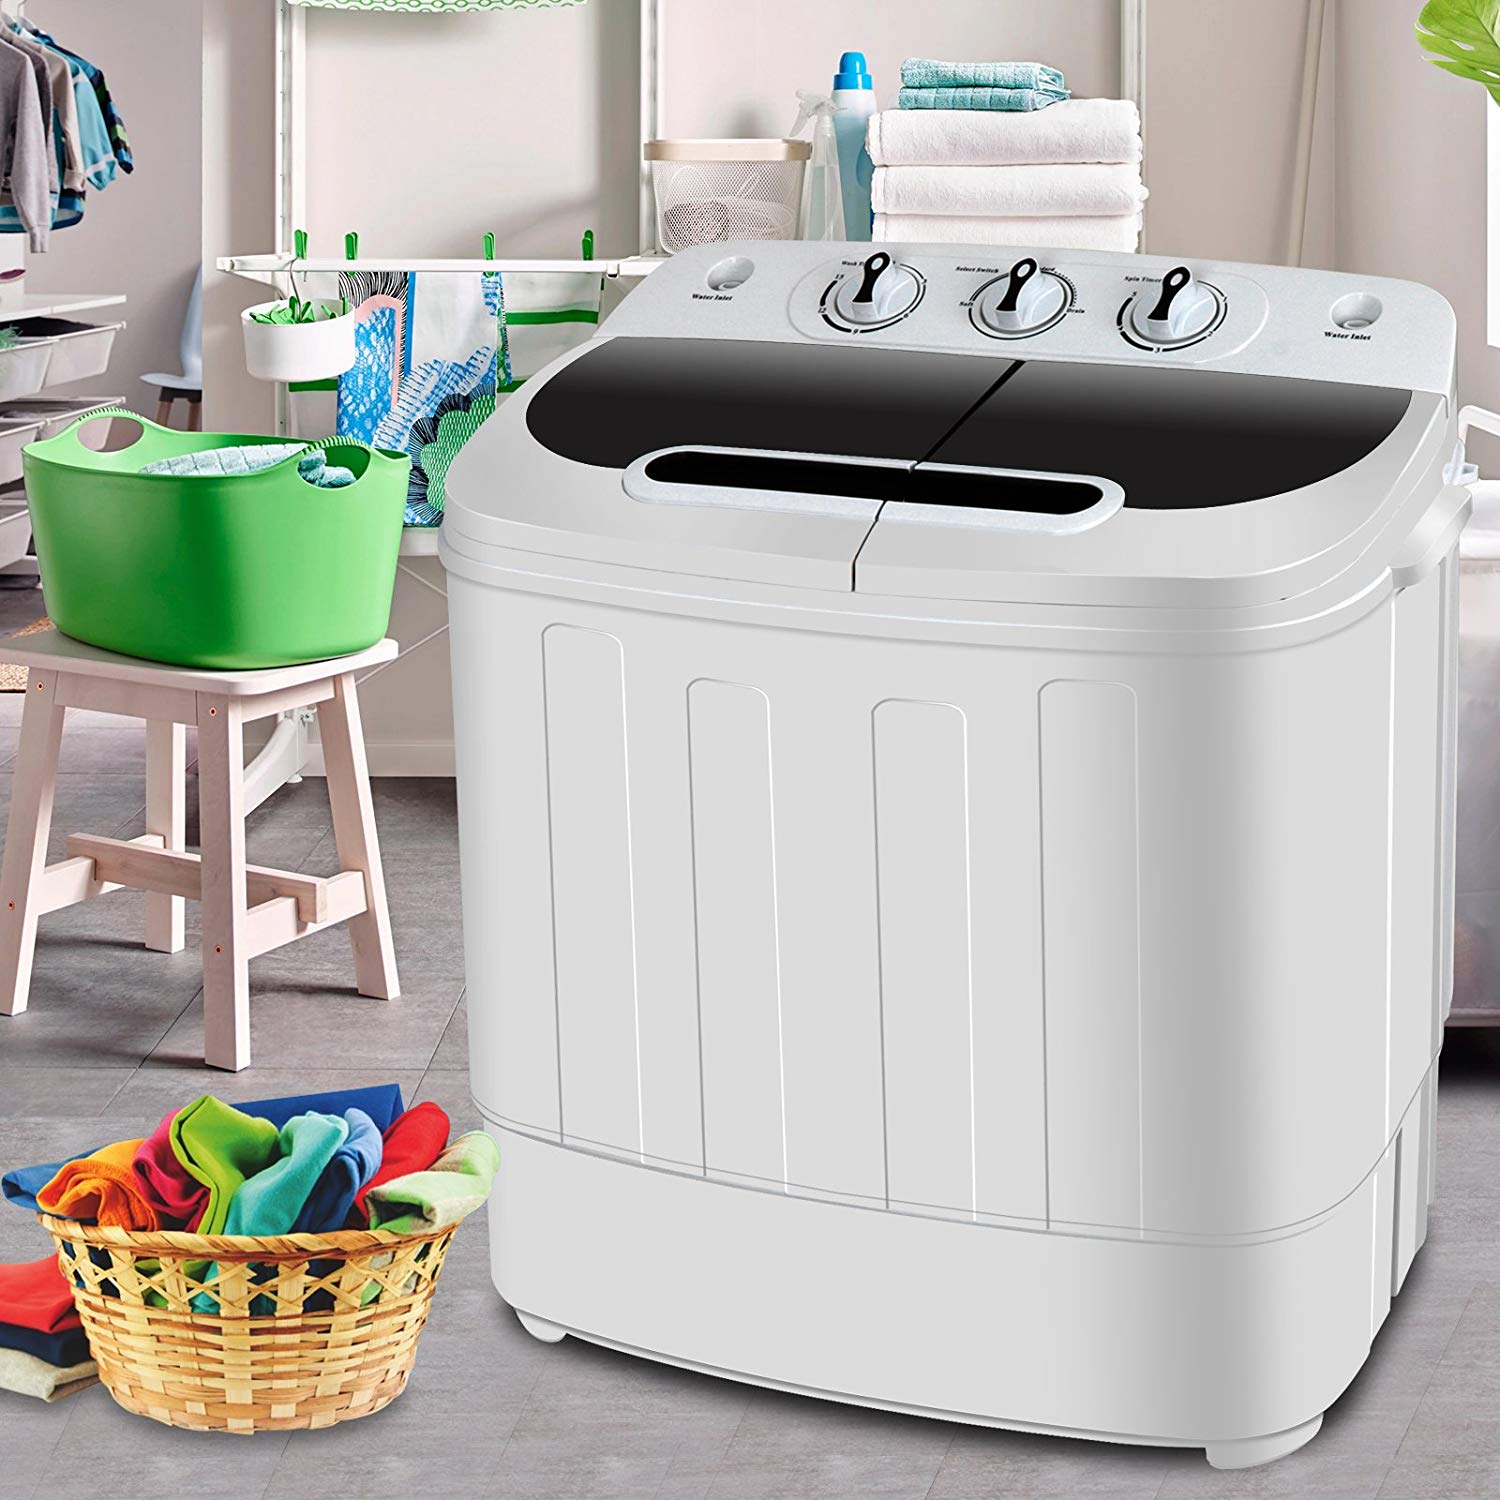 SUPER DEAL Portable Compact Mini Twin Tub Washing Machine w/Wash and Spin Cycle, Built-in Gravity Drain, 13lbs Capacity For Camping, Apartments, Dorms, College Rooms, RV’s, Delicates and more